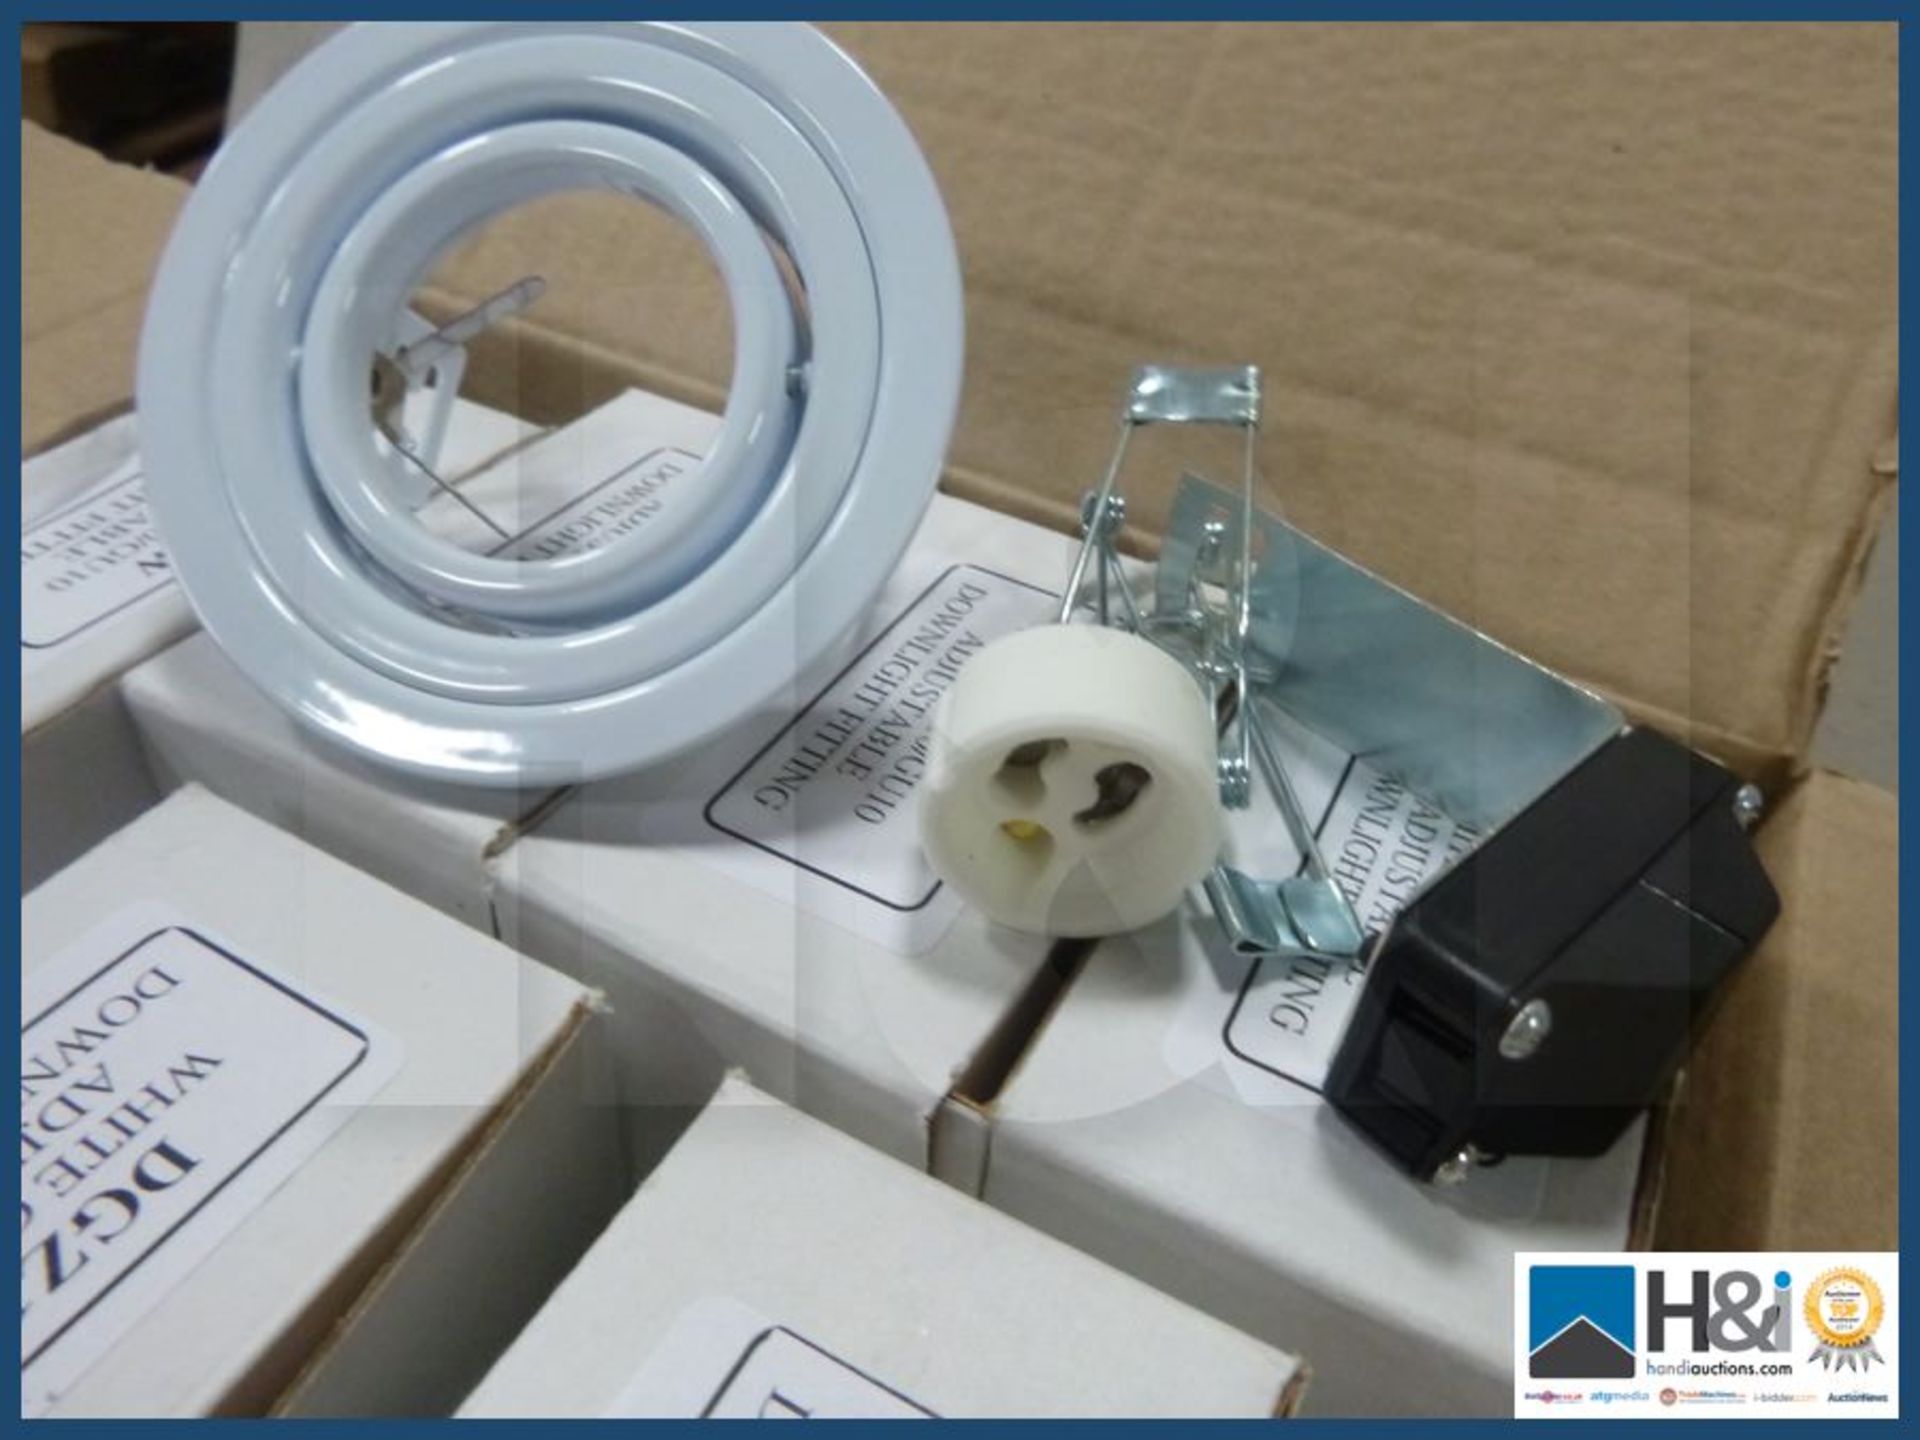 While adjustable downlight fitting GU10 fitting X 10 pcs. NO VAT on item except on buyers premium. S - Image 3 of 3